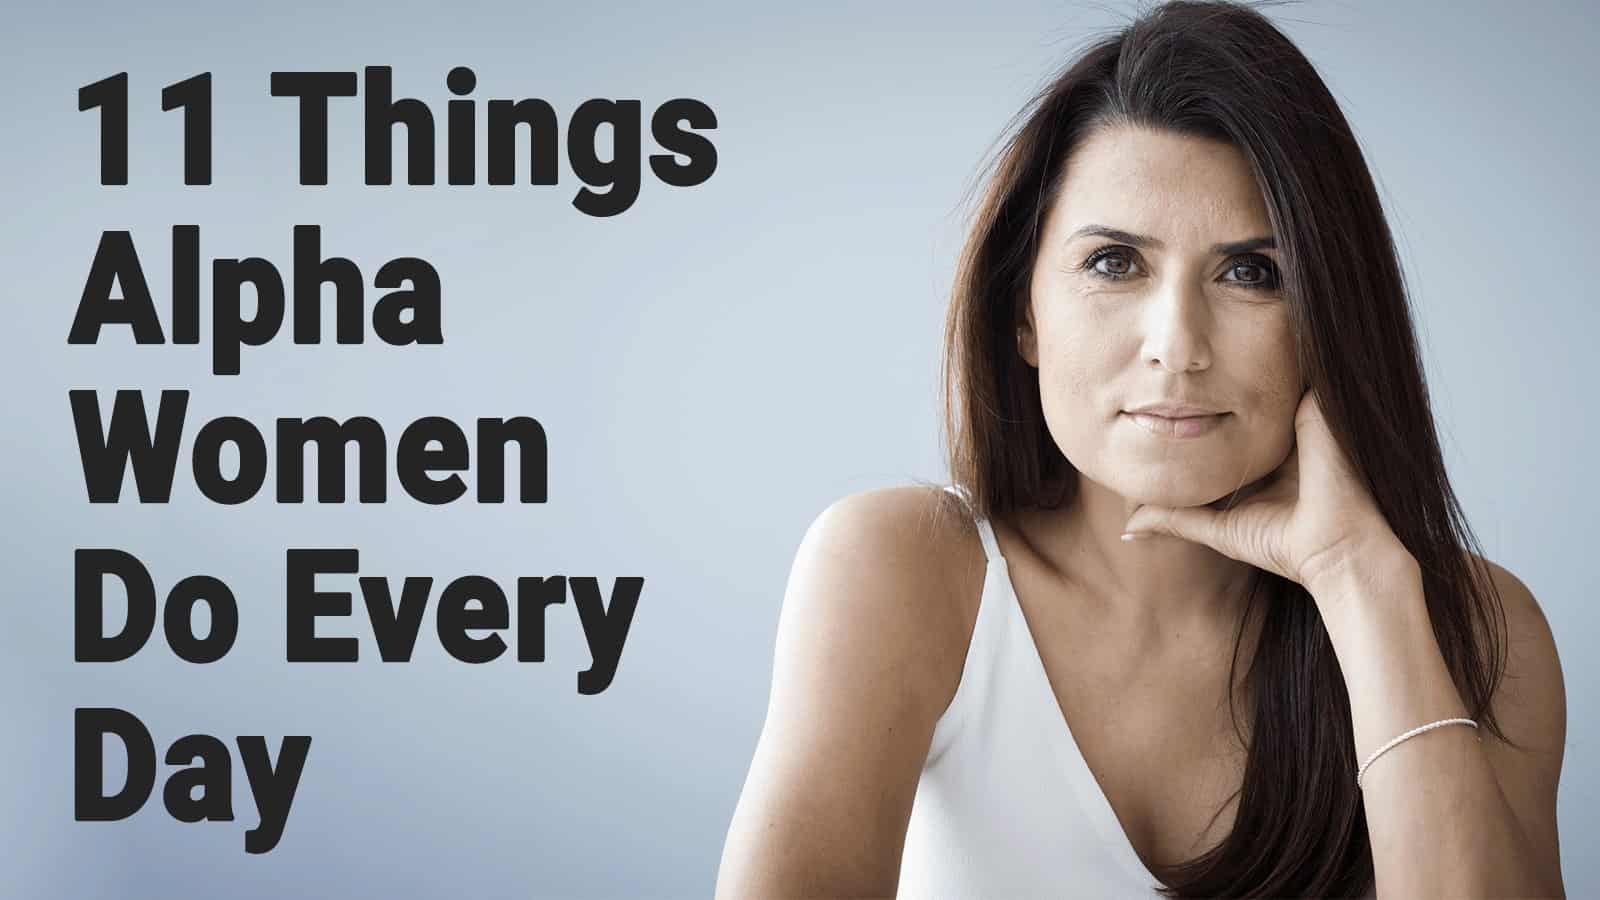 11 Things Alpha Women Do Every Day